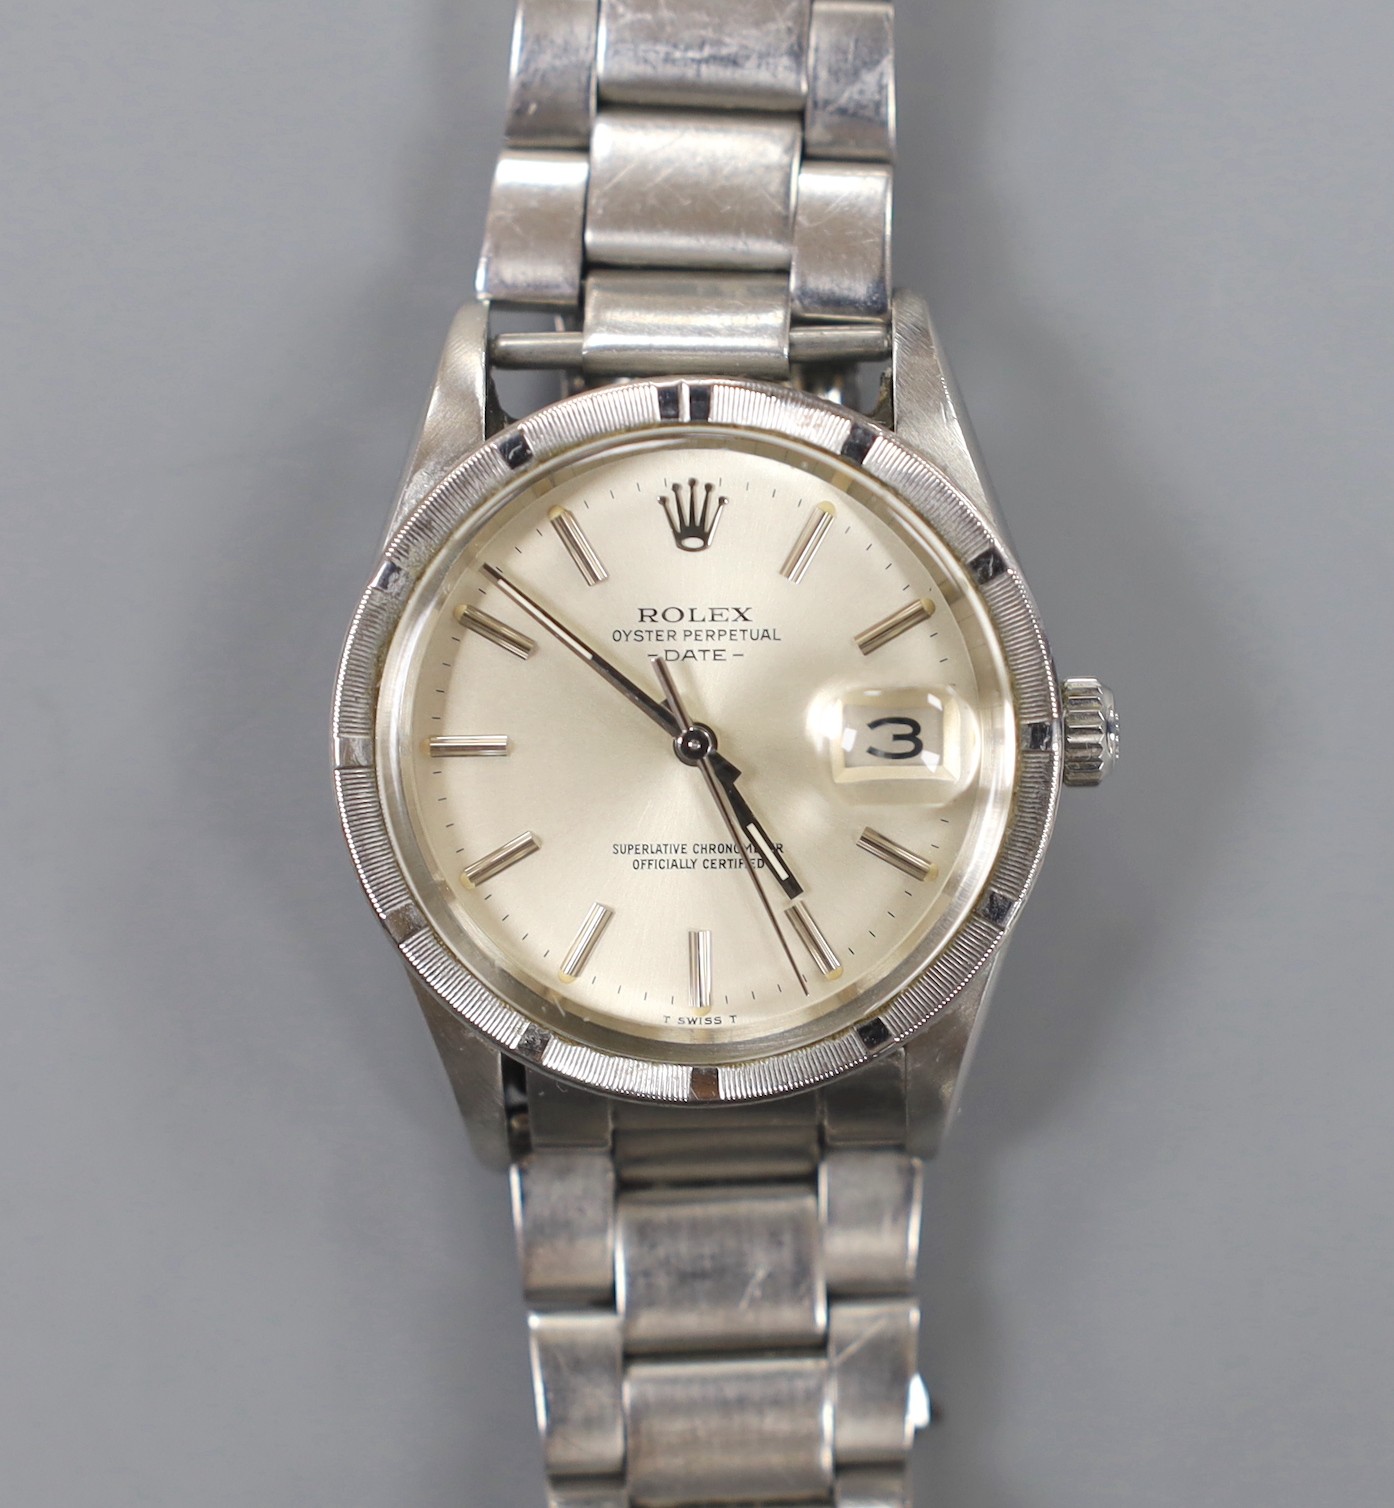 A gentleman's 1980's stainless steel Rolex Oyster Perpetual Date wrist watch, on an associated stainless steel bracelet, no box or papers